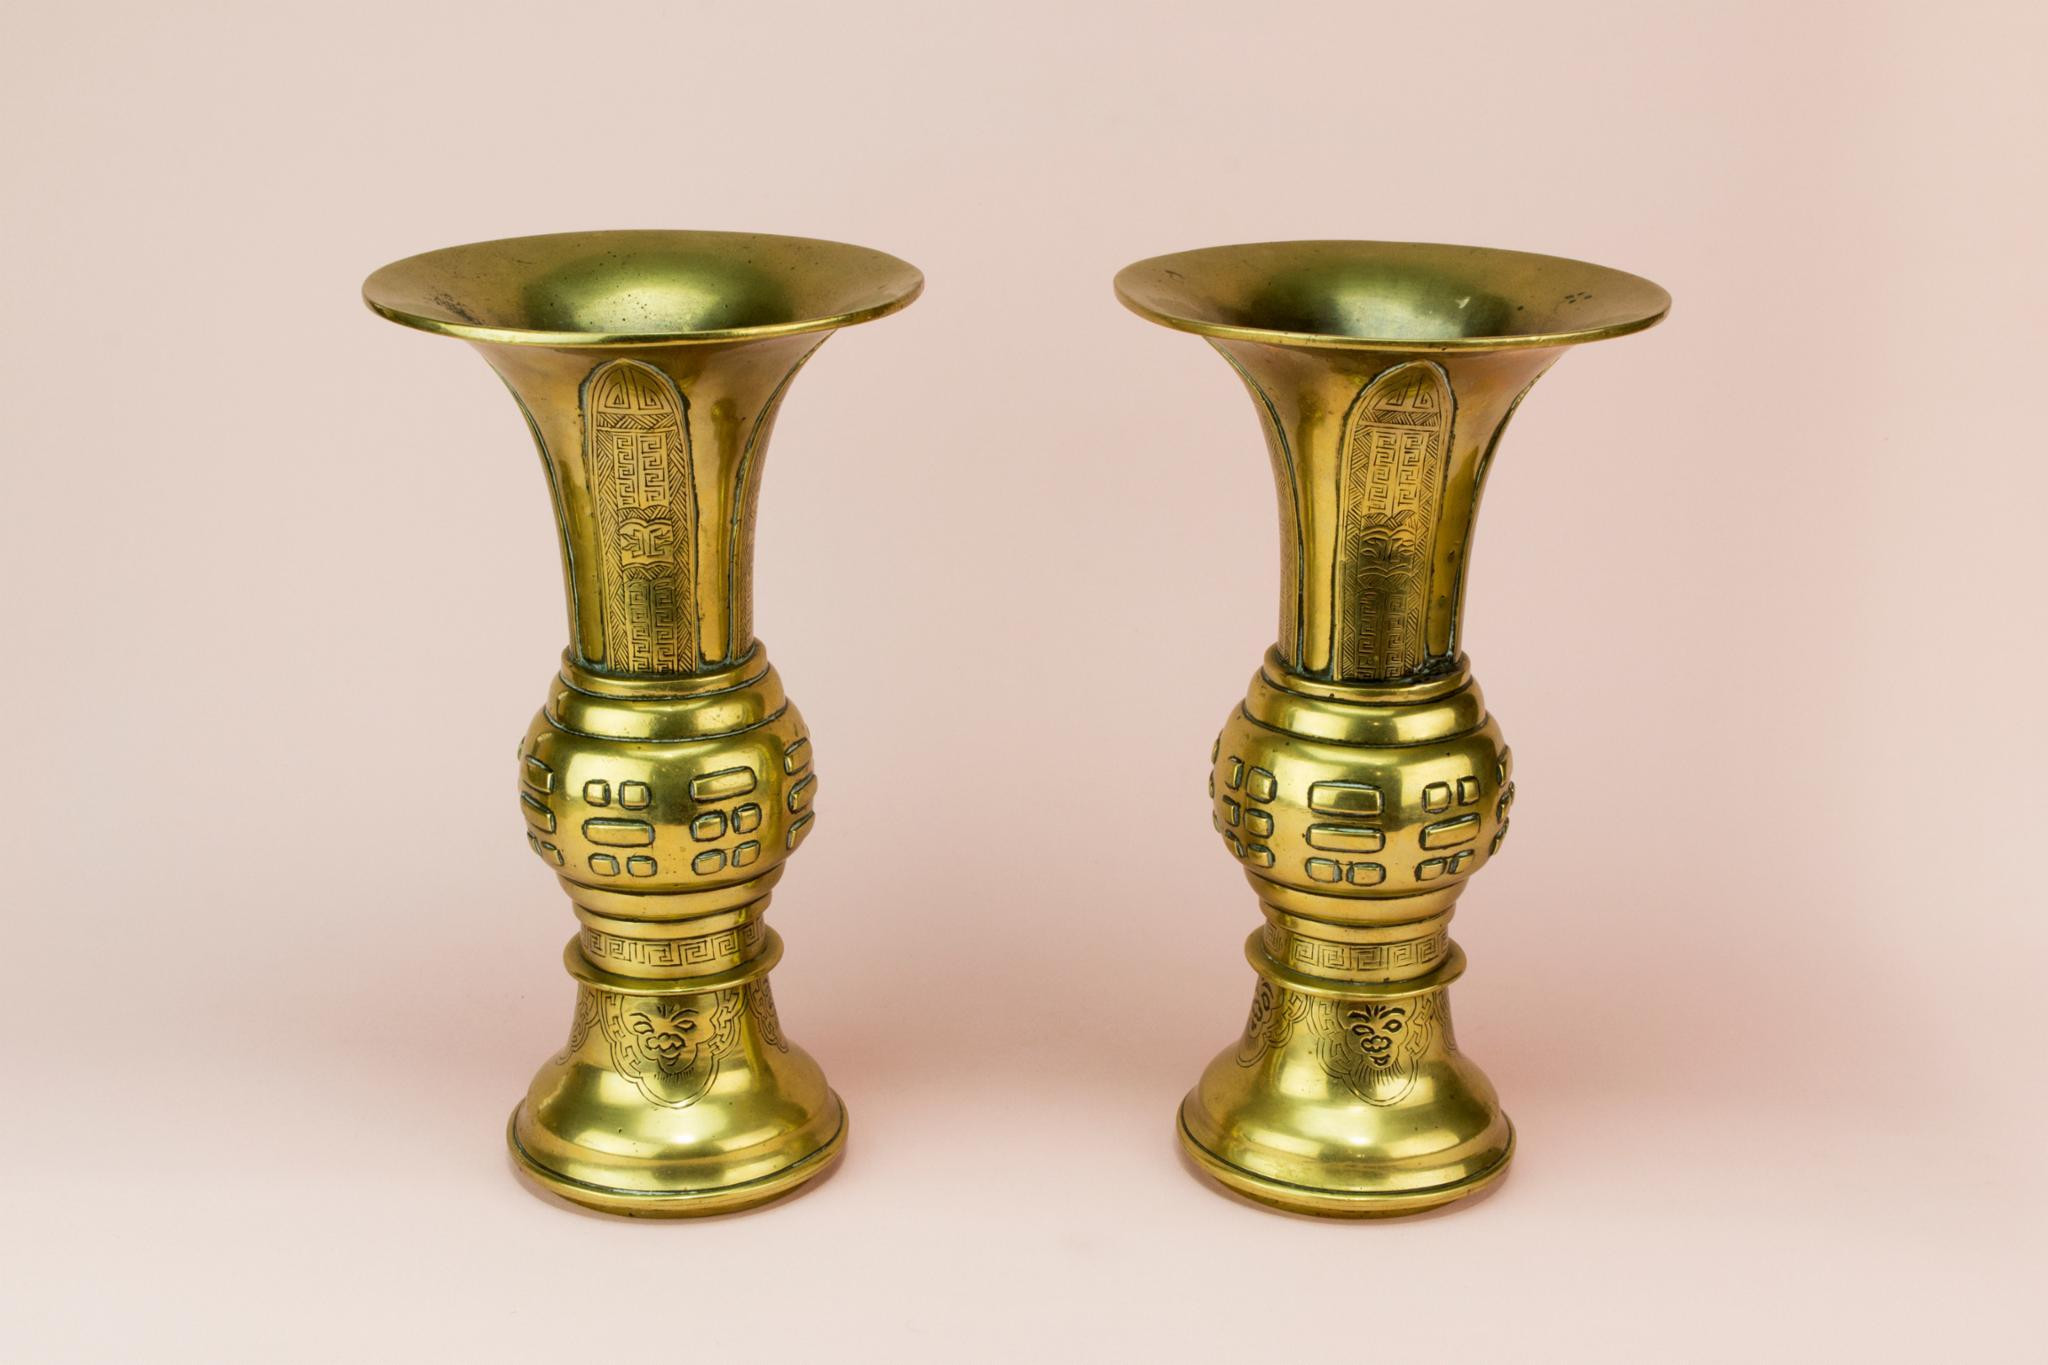 28 Famous Sterling Silver Bud Vase 2024 free download sterling silver bud vase of 2 gu shaped brass vases chinese 19th century late 19th century with regard to 2 gu shaped brass vases chinese 19th century